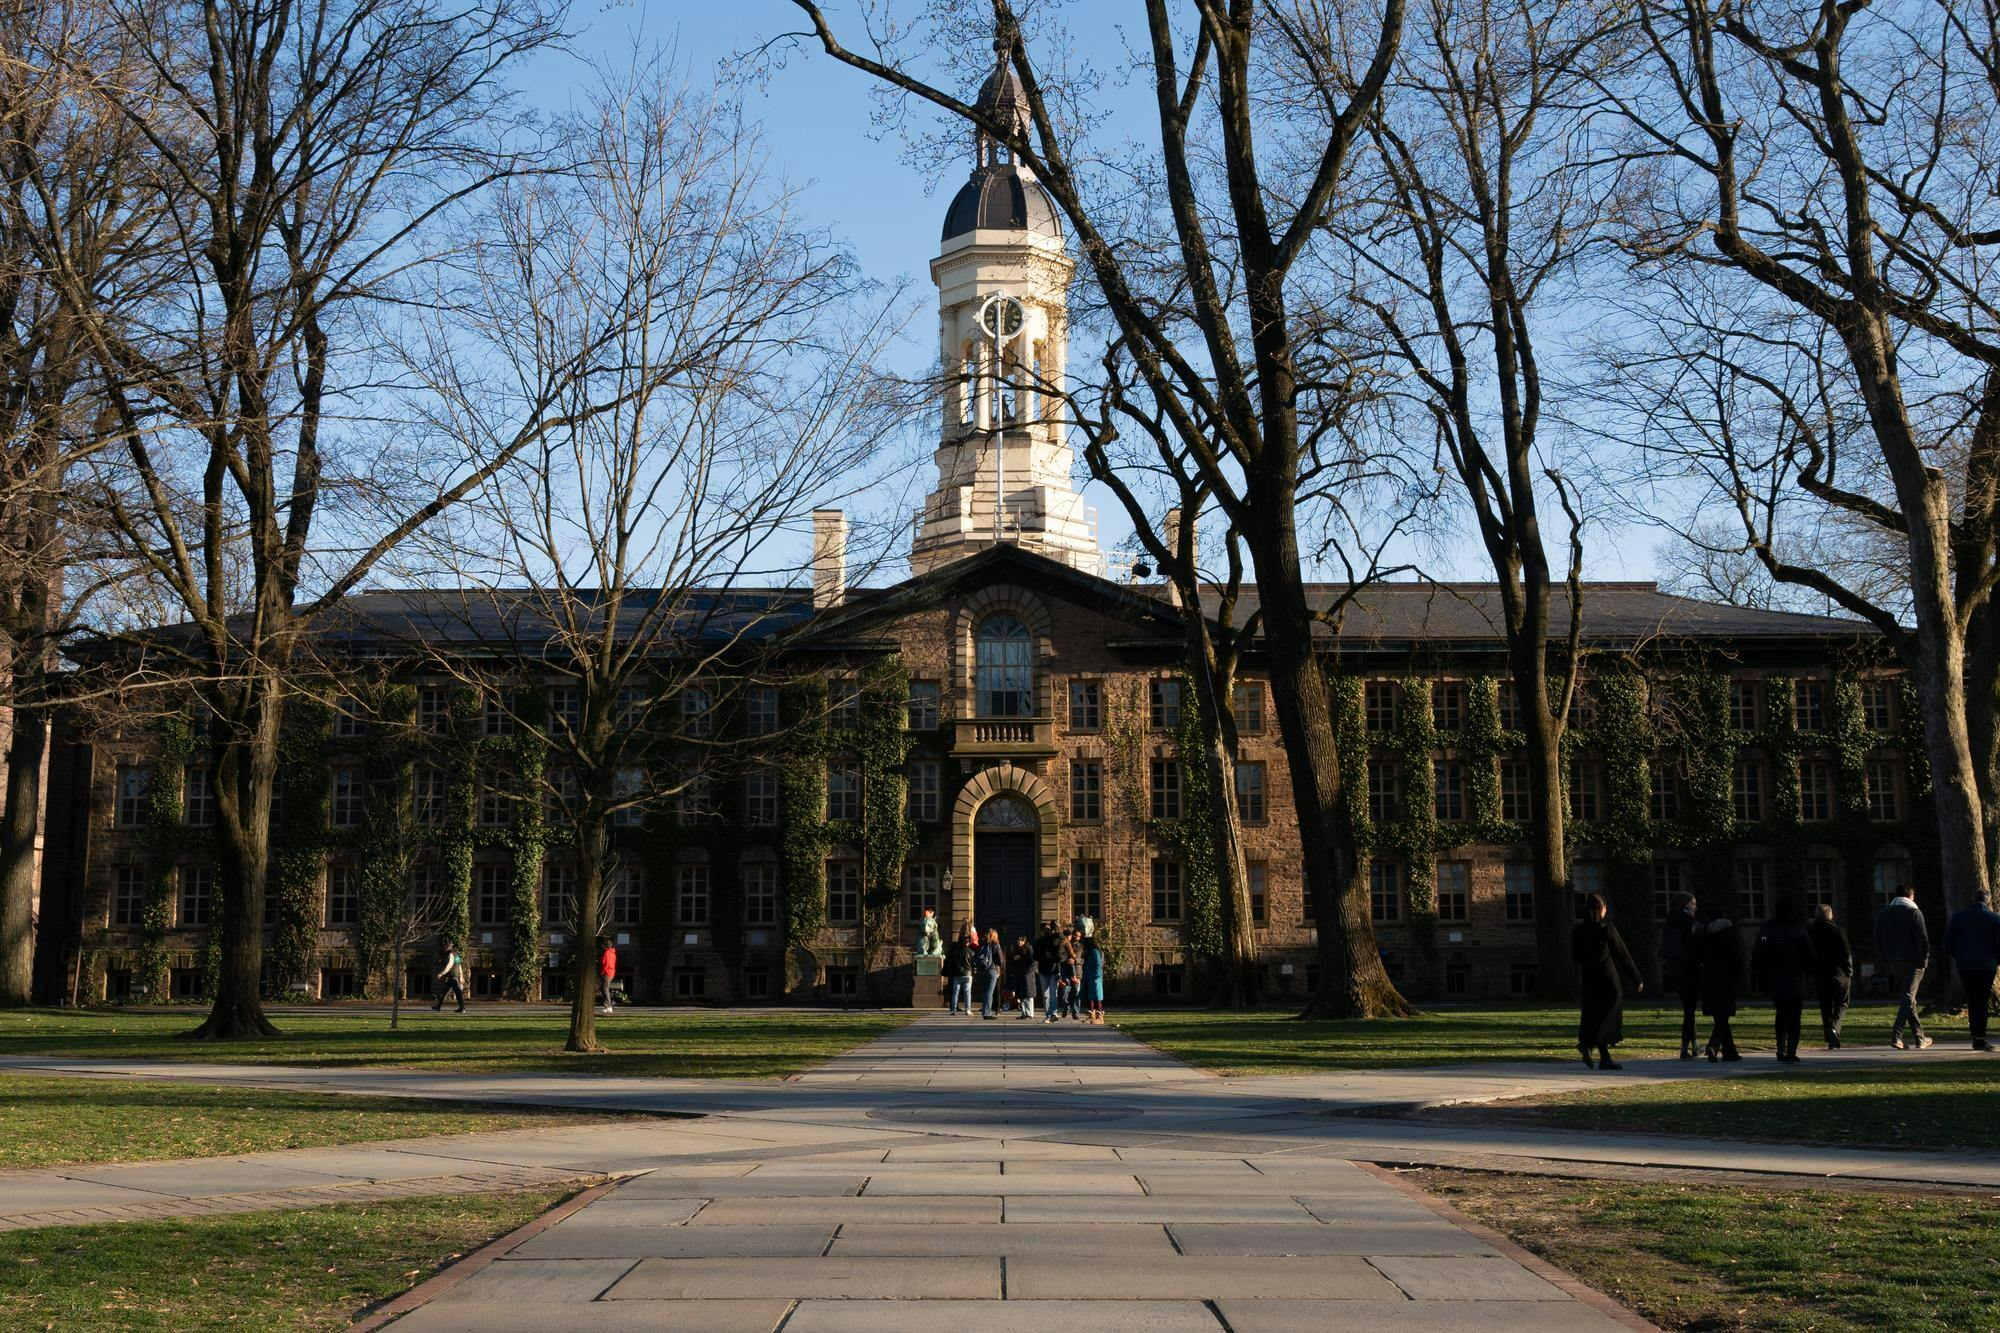 A large rectangular stone building with a bell tower is bathed in late afternoon light. Several groups stand around the lawn in front of the building. 